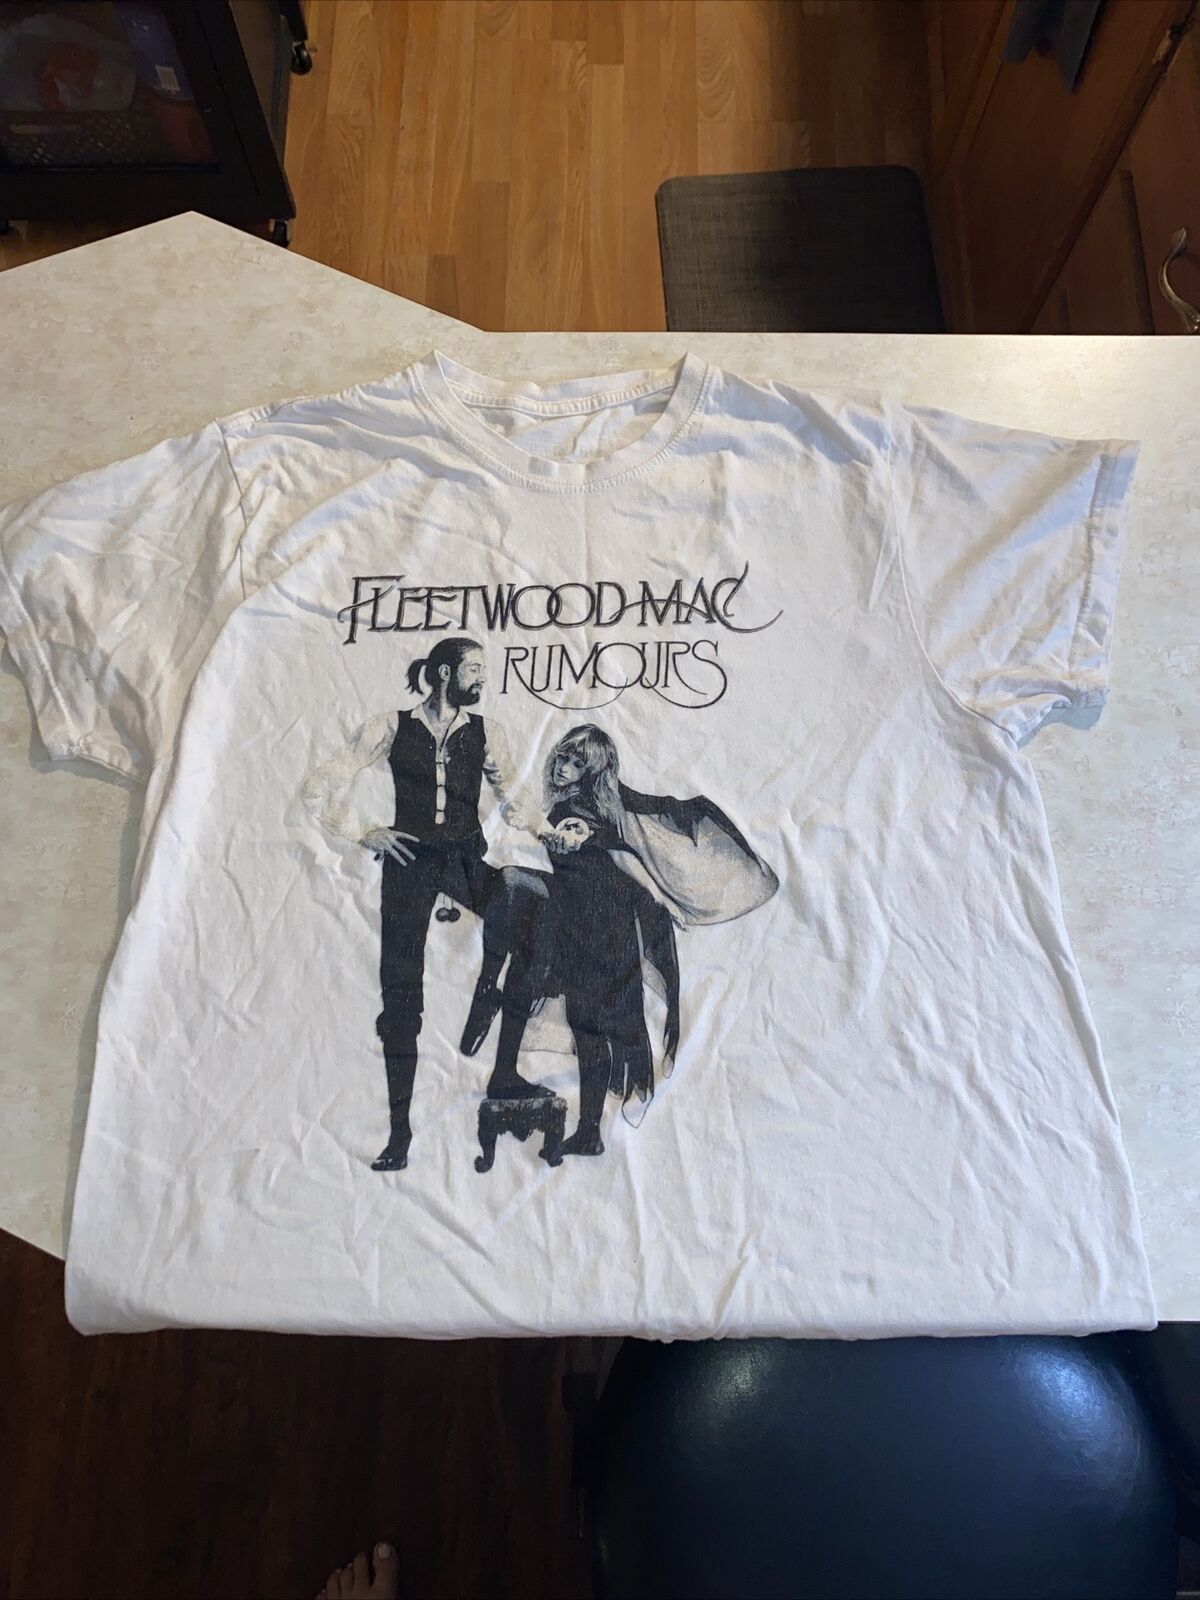 Fleetwoodmac Rumours T-Shirt Size XL: Adult Unisex: One Small Stain